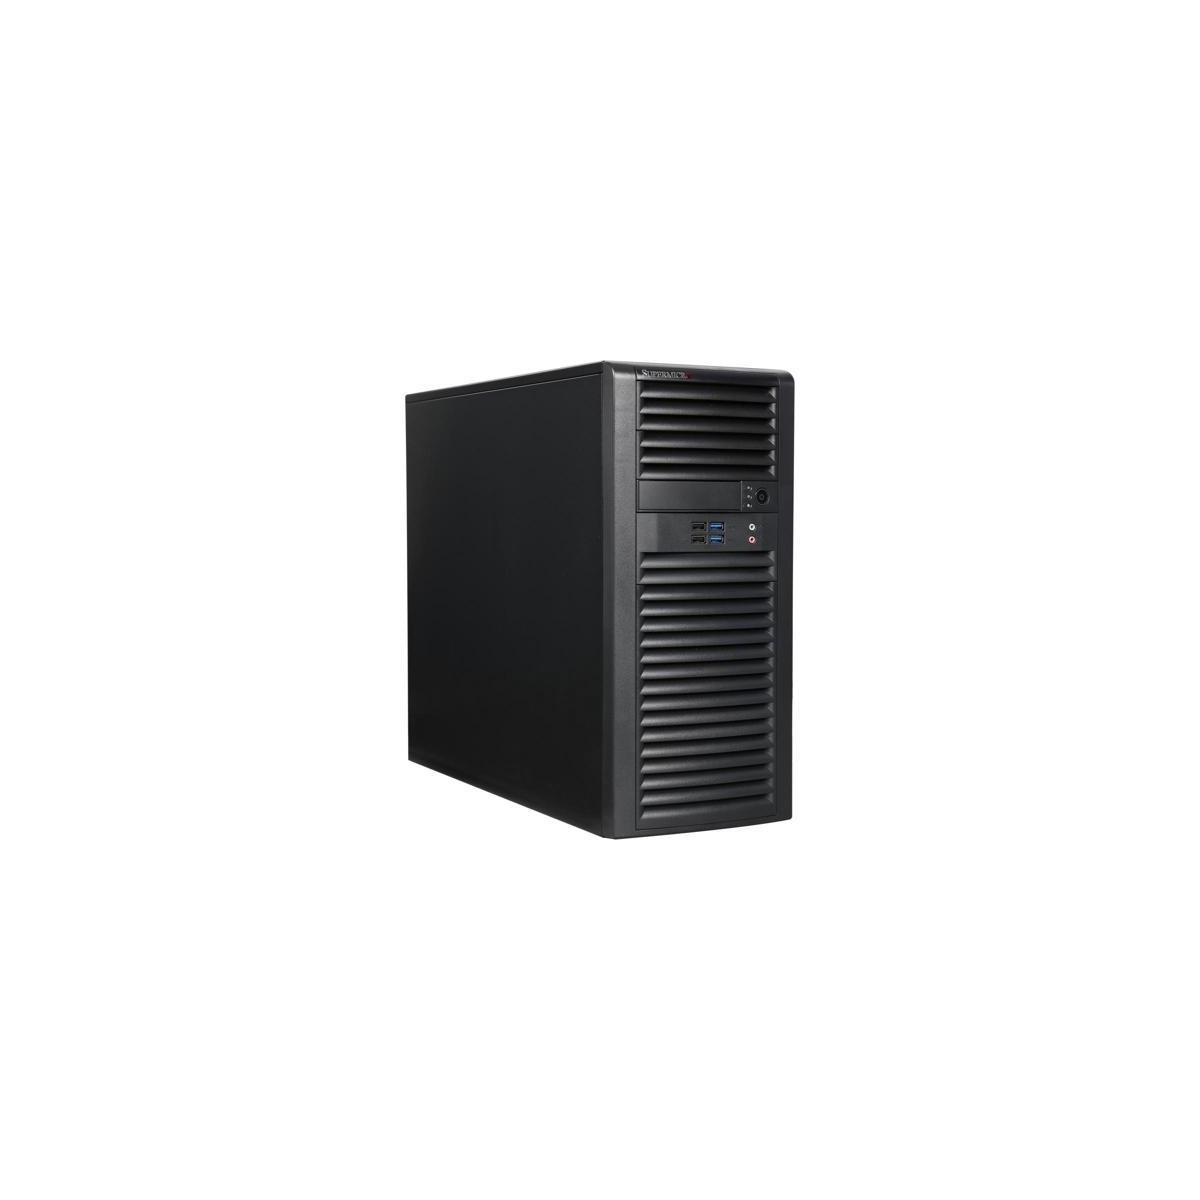 Supermicro 732D4-903B Mid-Tower 900W Black Workstation Case with 900W 80PLUS Gold Power Supply - Midi Tower - Server - Black - A